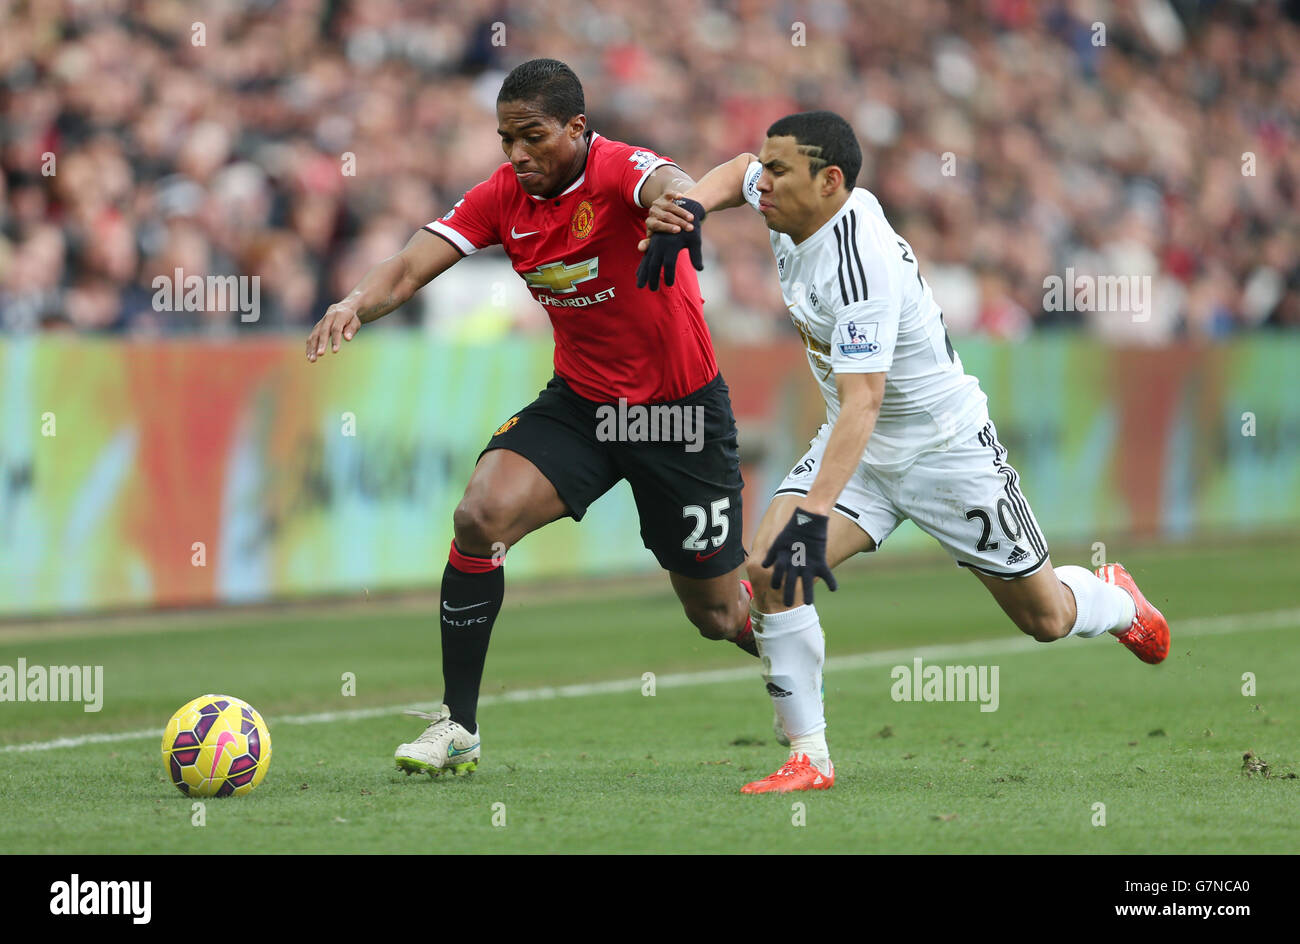 Manchester United's Antonio Valencia and Swansea City's Jefferson Montero during the Barclays Premier League match at the Liberty Stadium, Swansea. PRESS ASSOCIATION Photo. Picture date: Saturday February 21, 2015. See PA story SOCCER Swansea. Photo credit should read: David Davies/PA Wire. Stock Photo